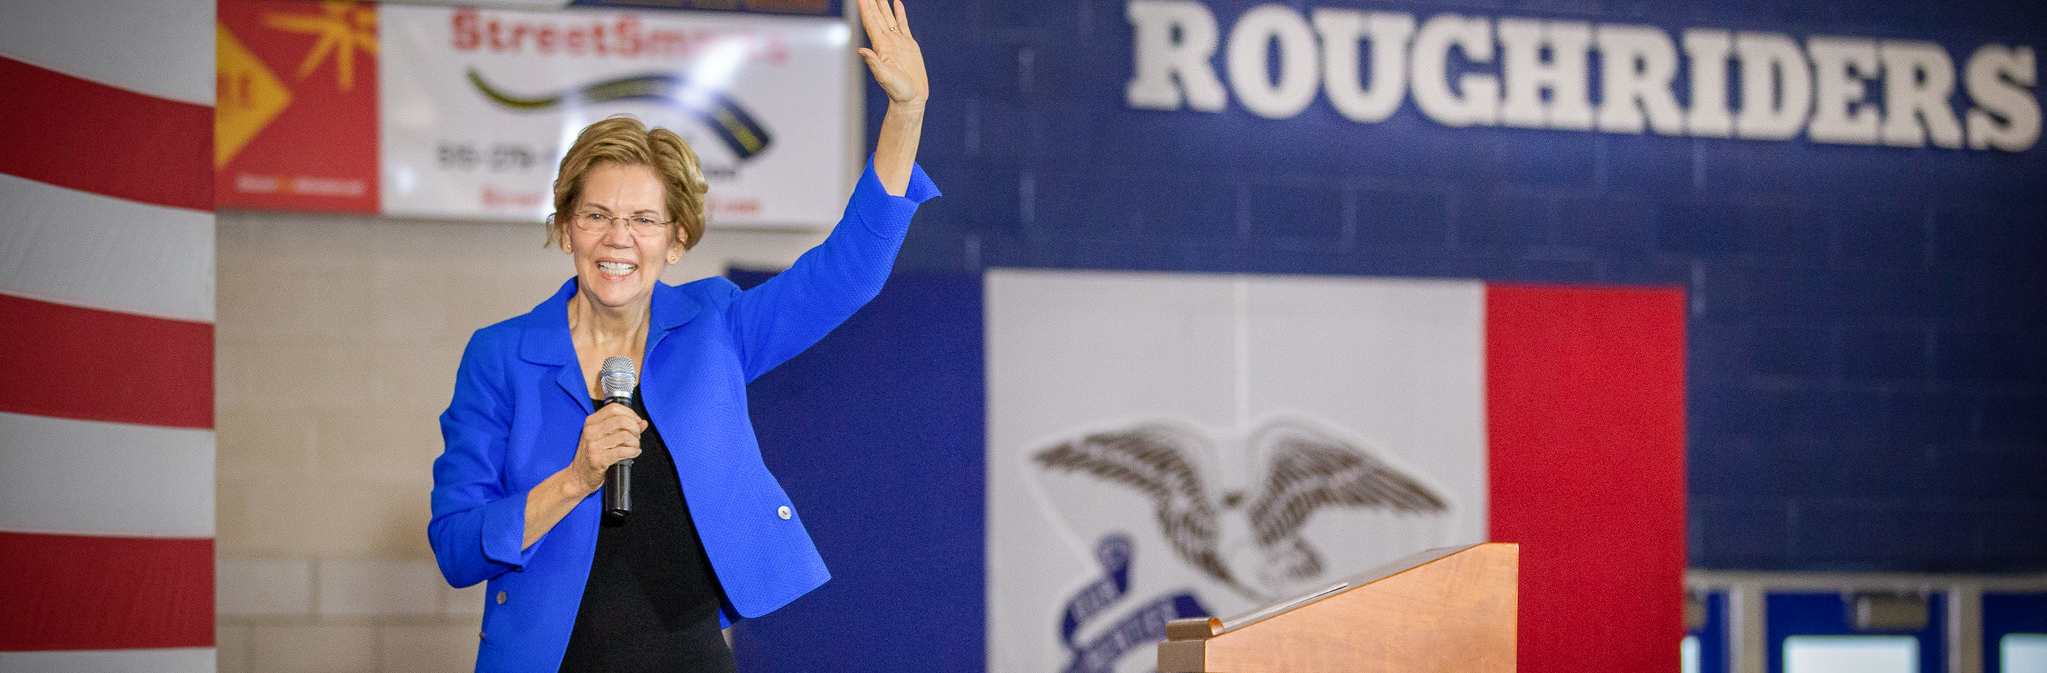 Campaign Trail Makes Another DMPS Stop as Warren Talks Education